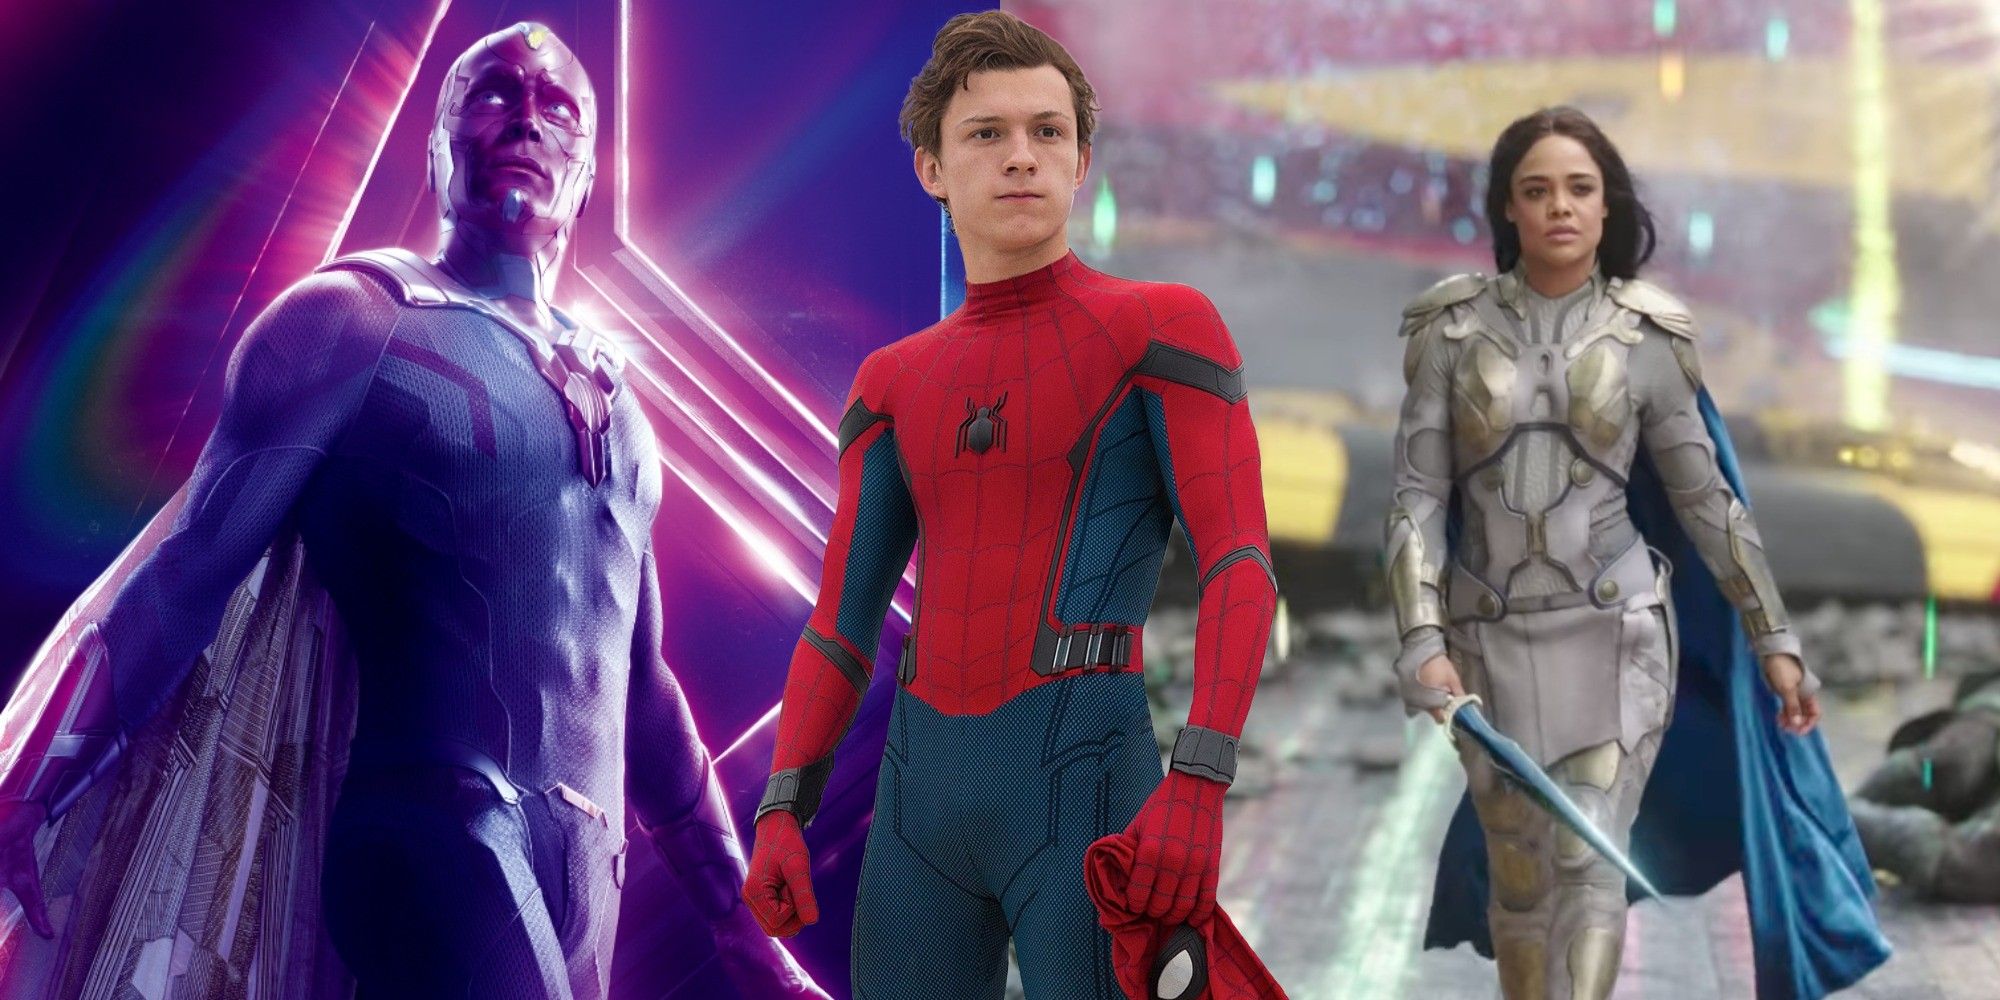 Split image of Vision, Spider-Man and Valkyrie from the MCU